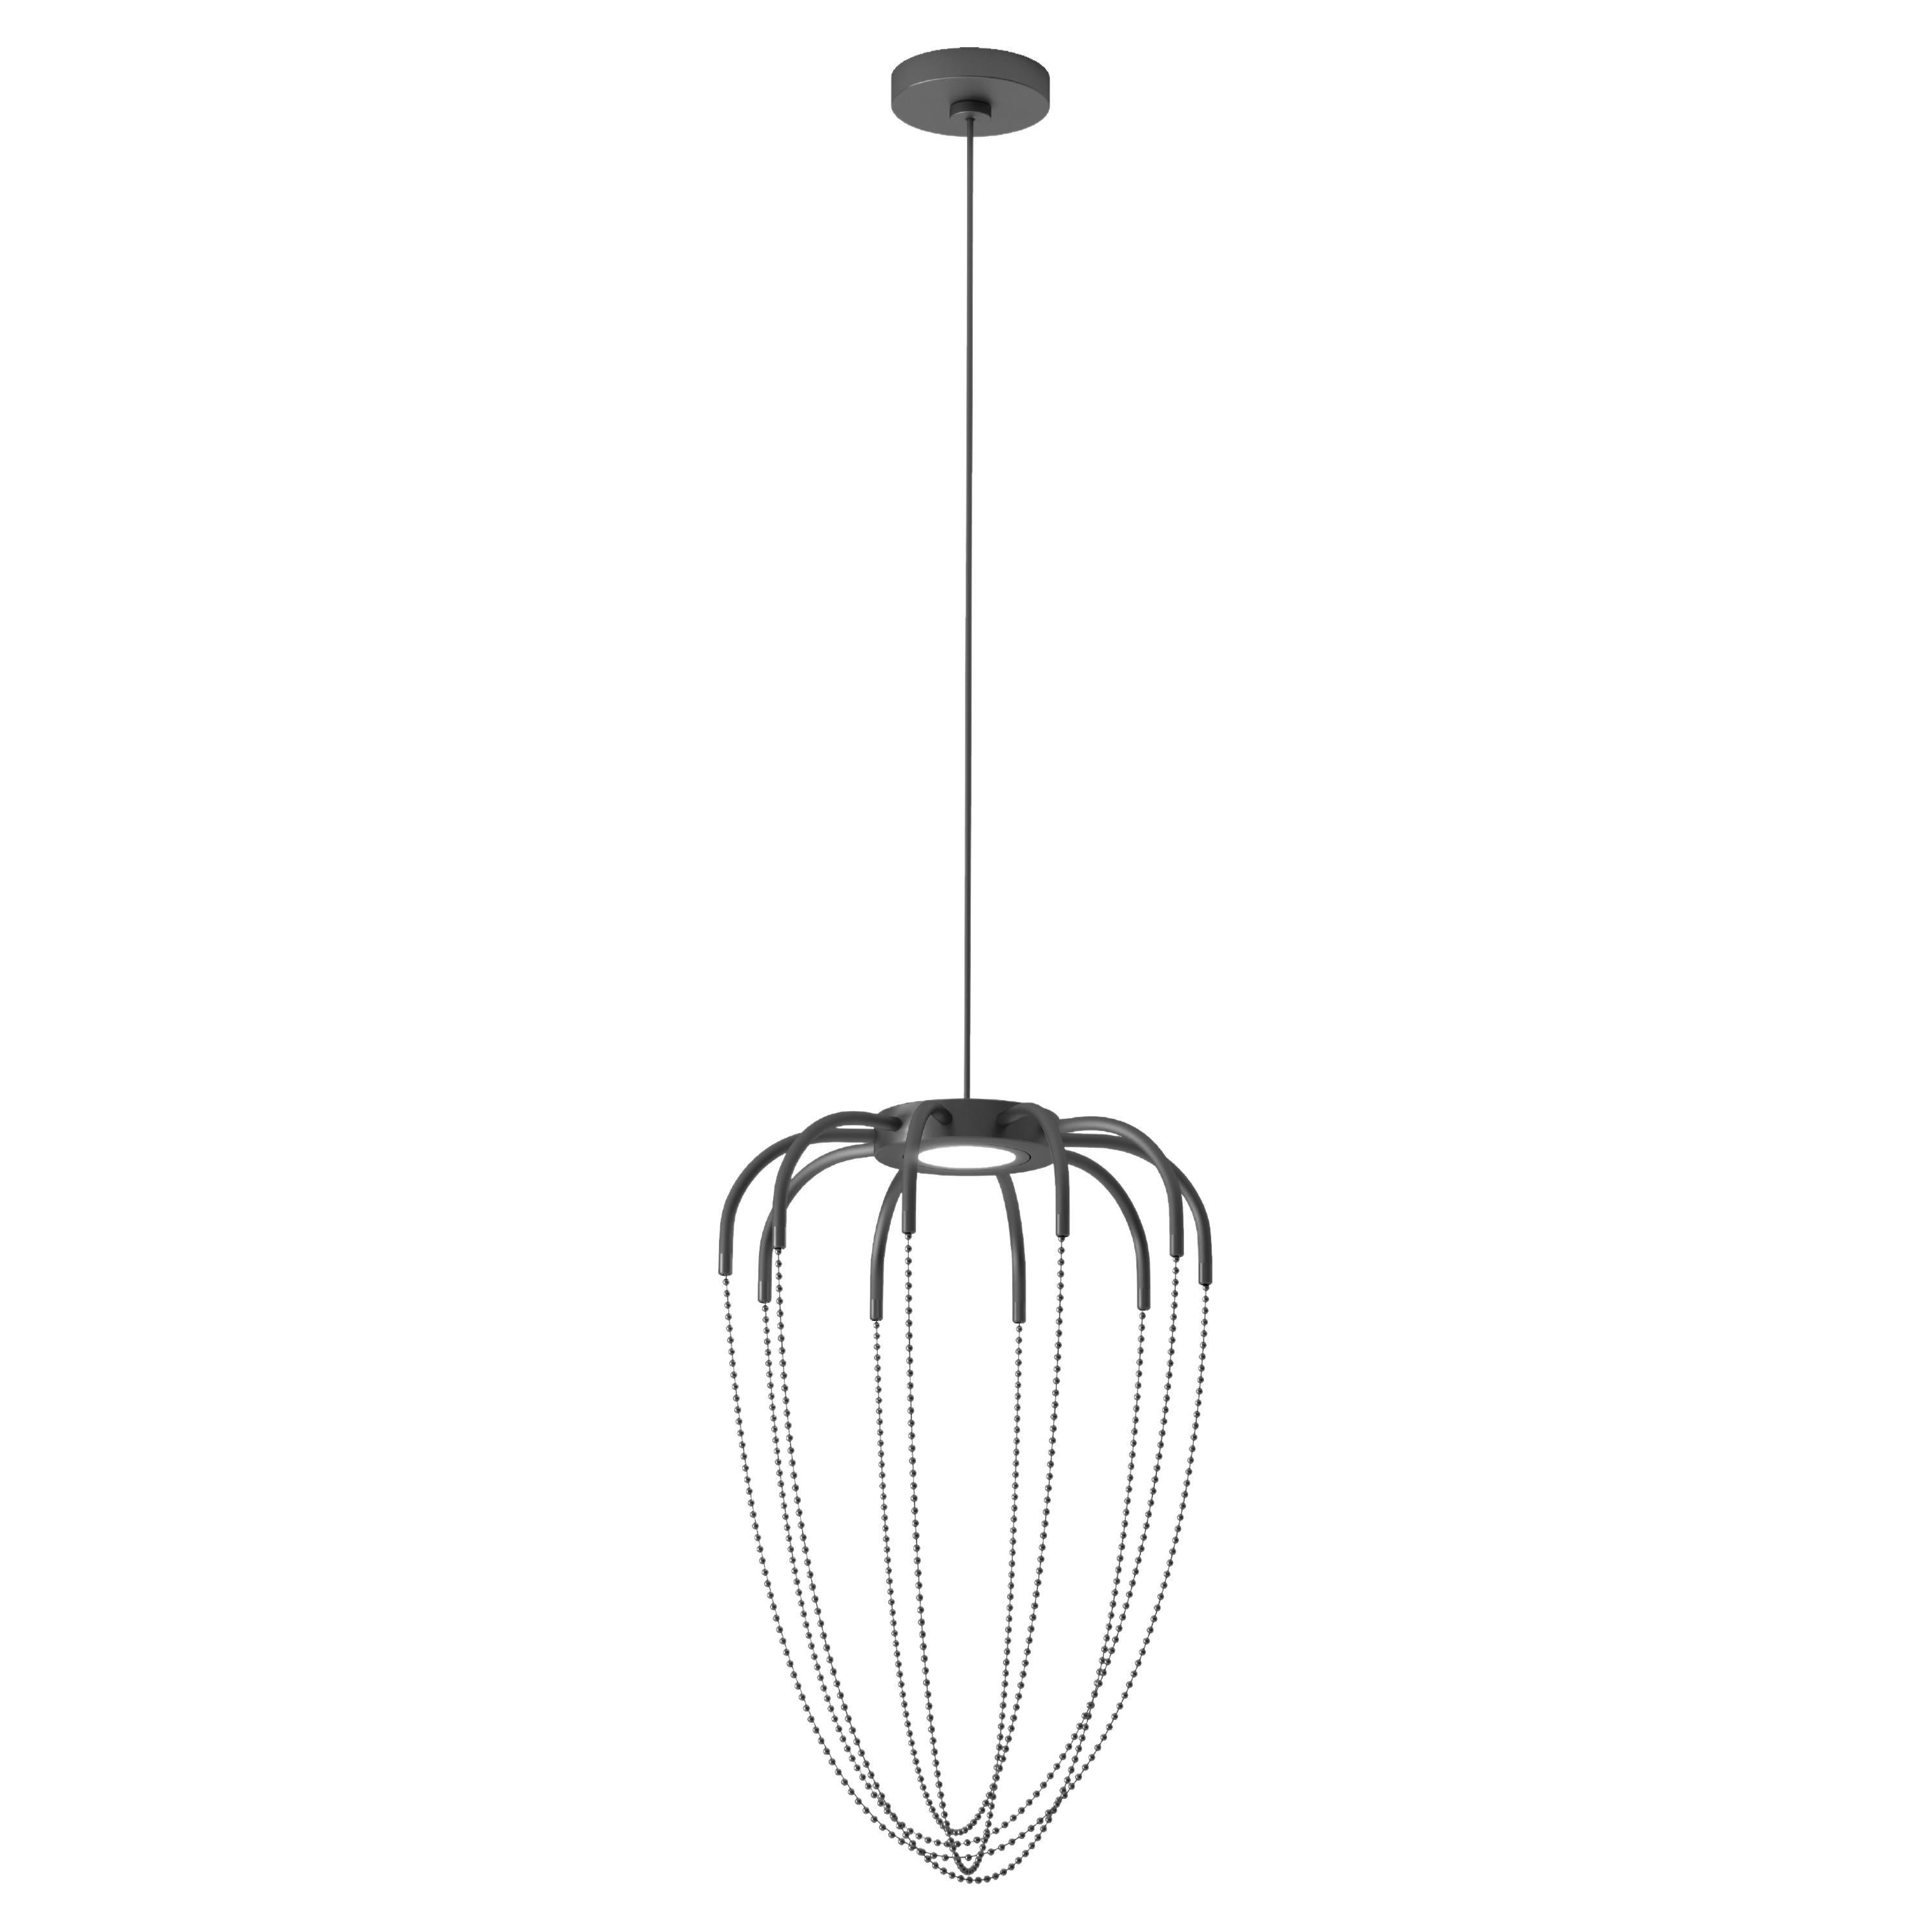 Axolight Alysoid Medium Pendant Lamp in Anthracite Grey with Nickel Chains For Sale